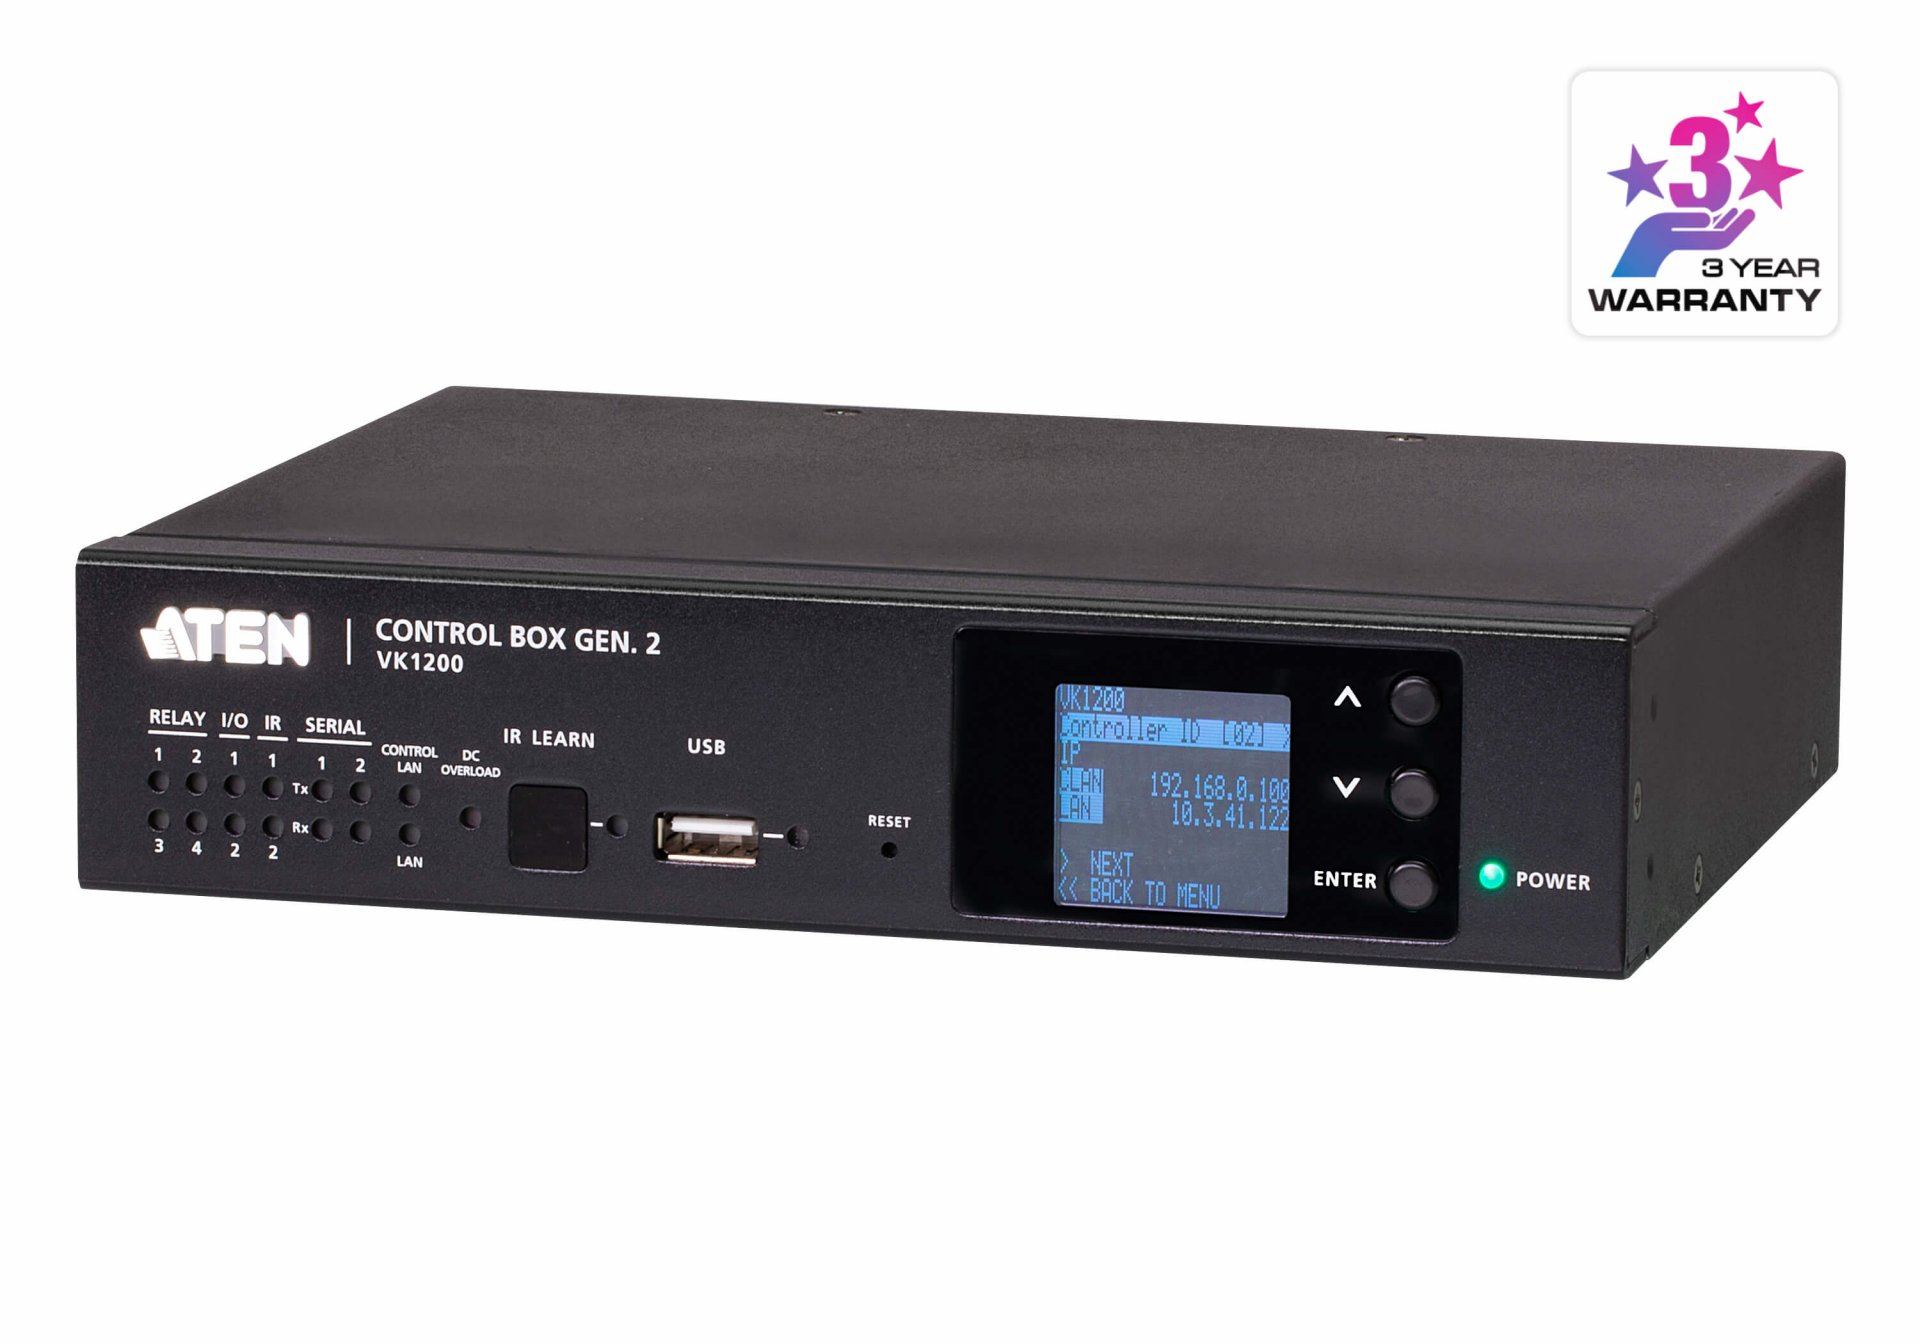 VK1200 : ATEN Control System - Compact Control Box Gen. 2 with Dual LAN